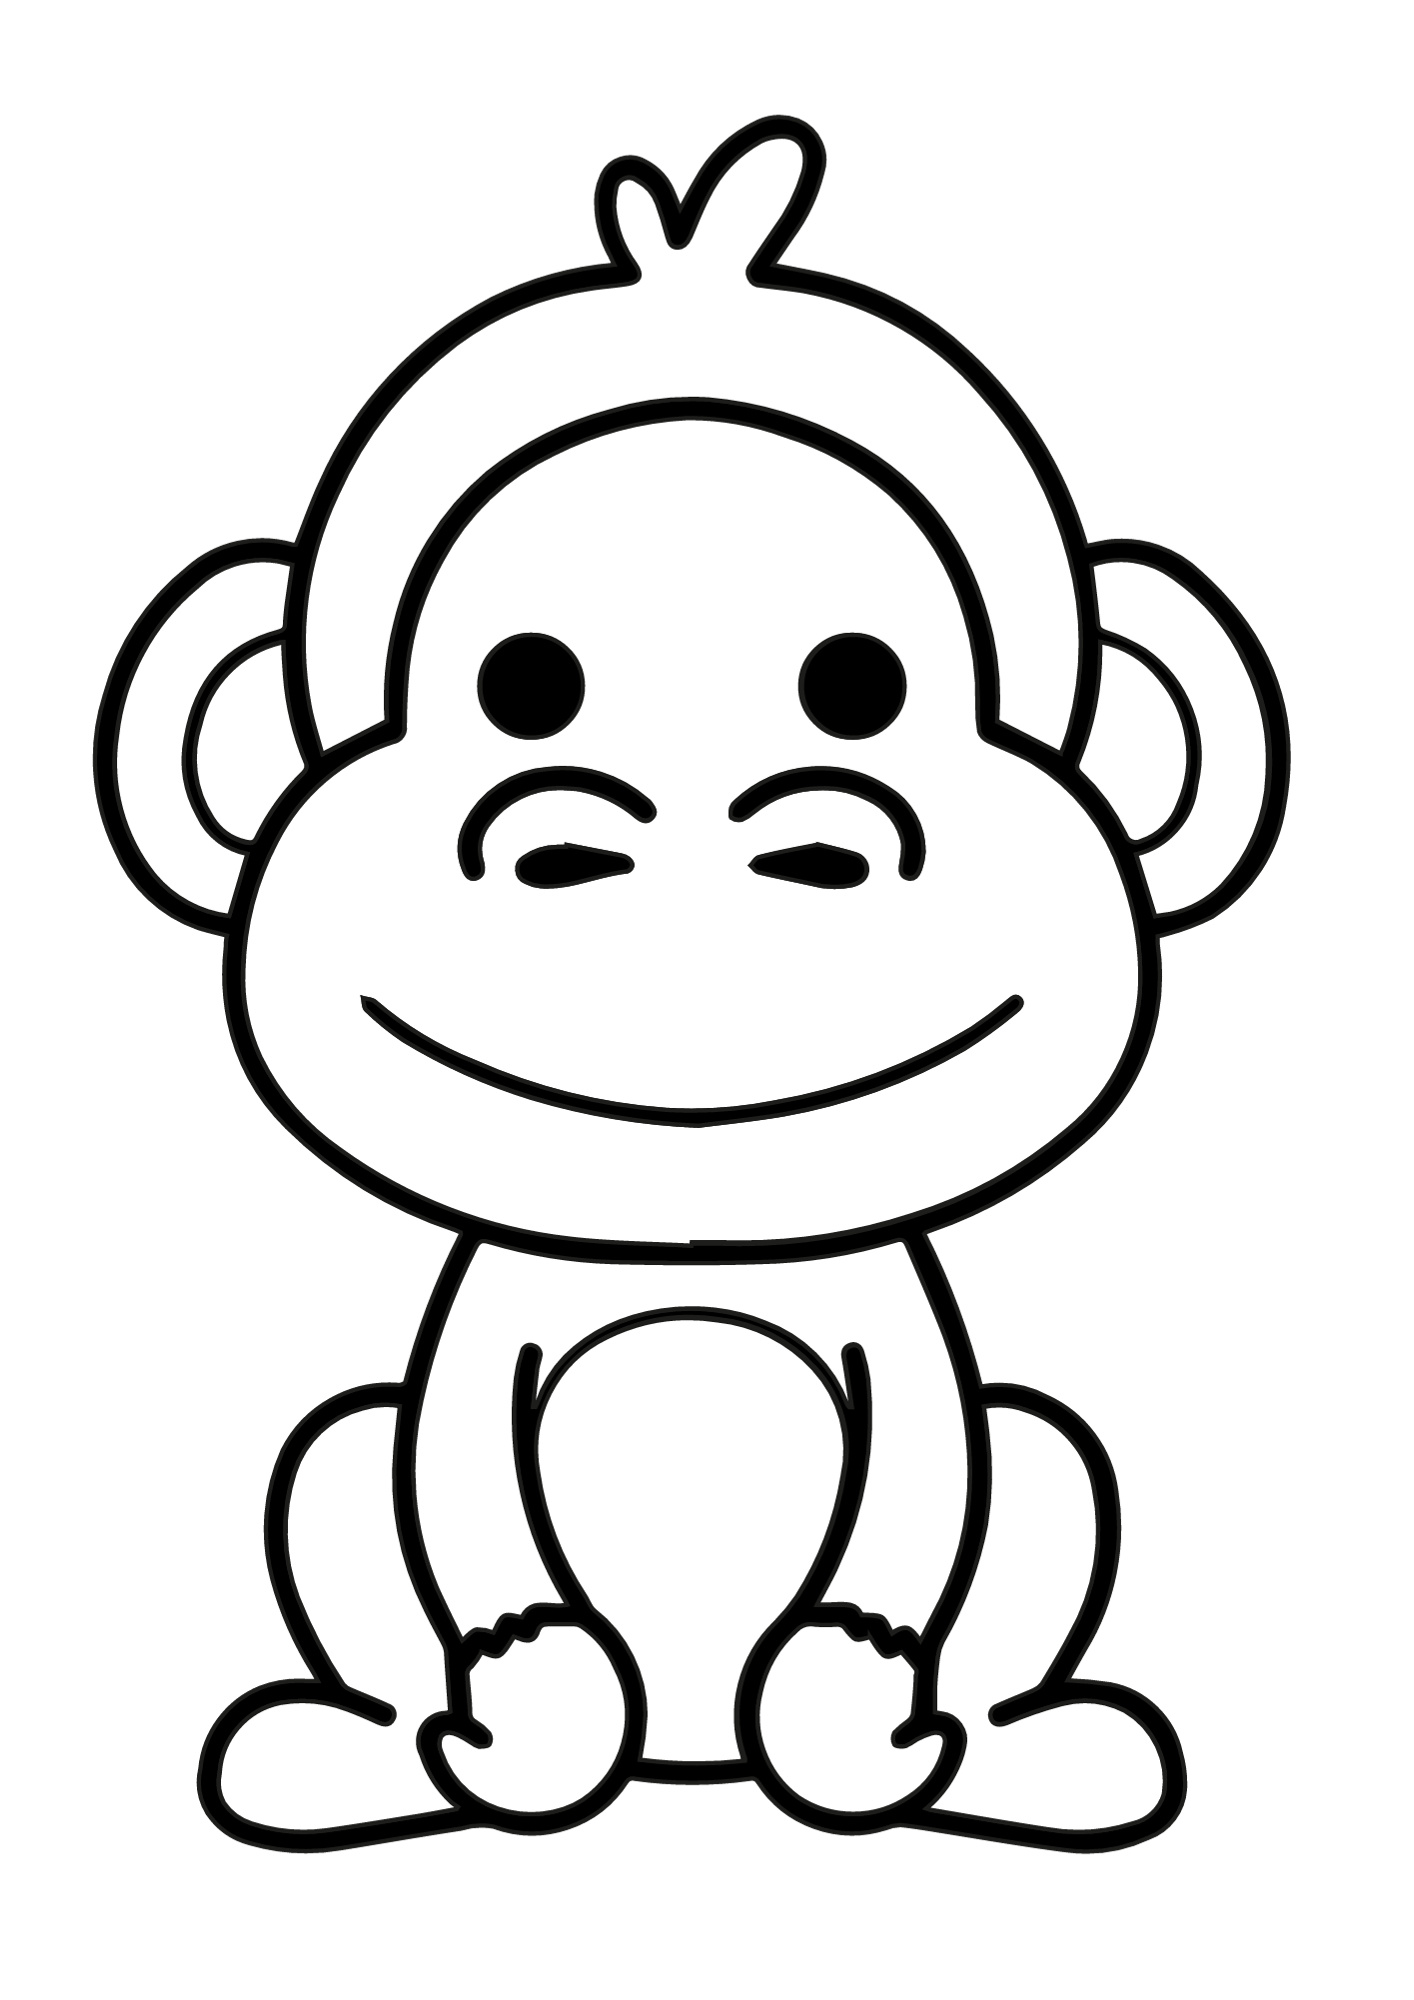 Monkey Cartoon Coloring Page